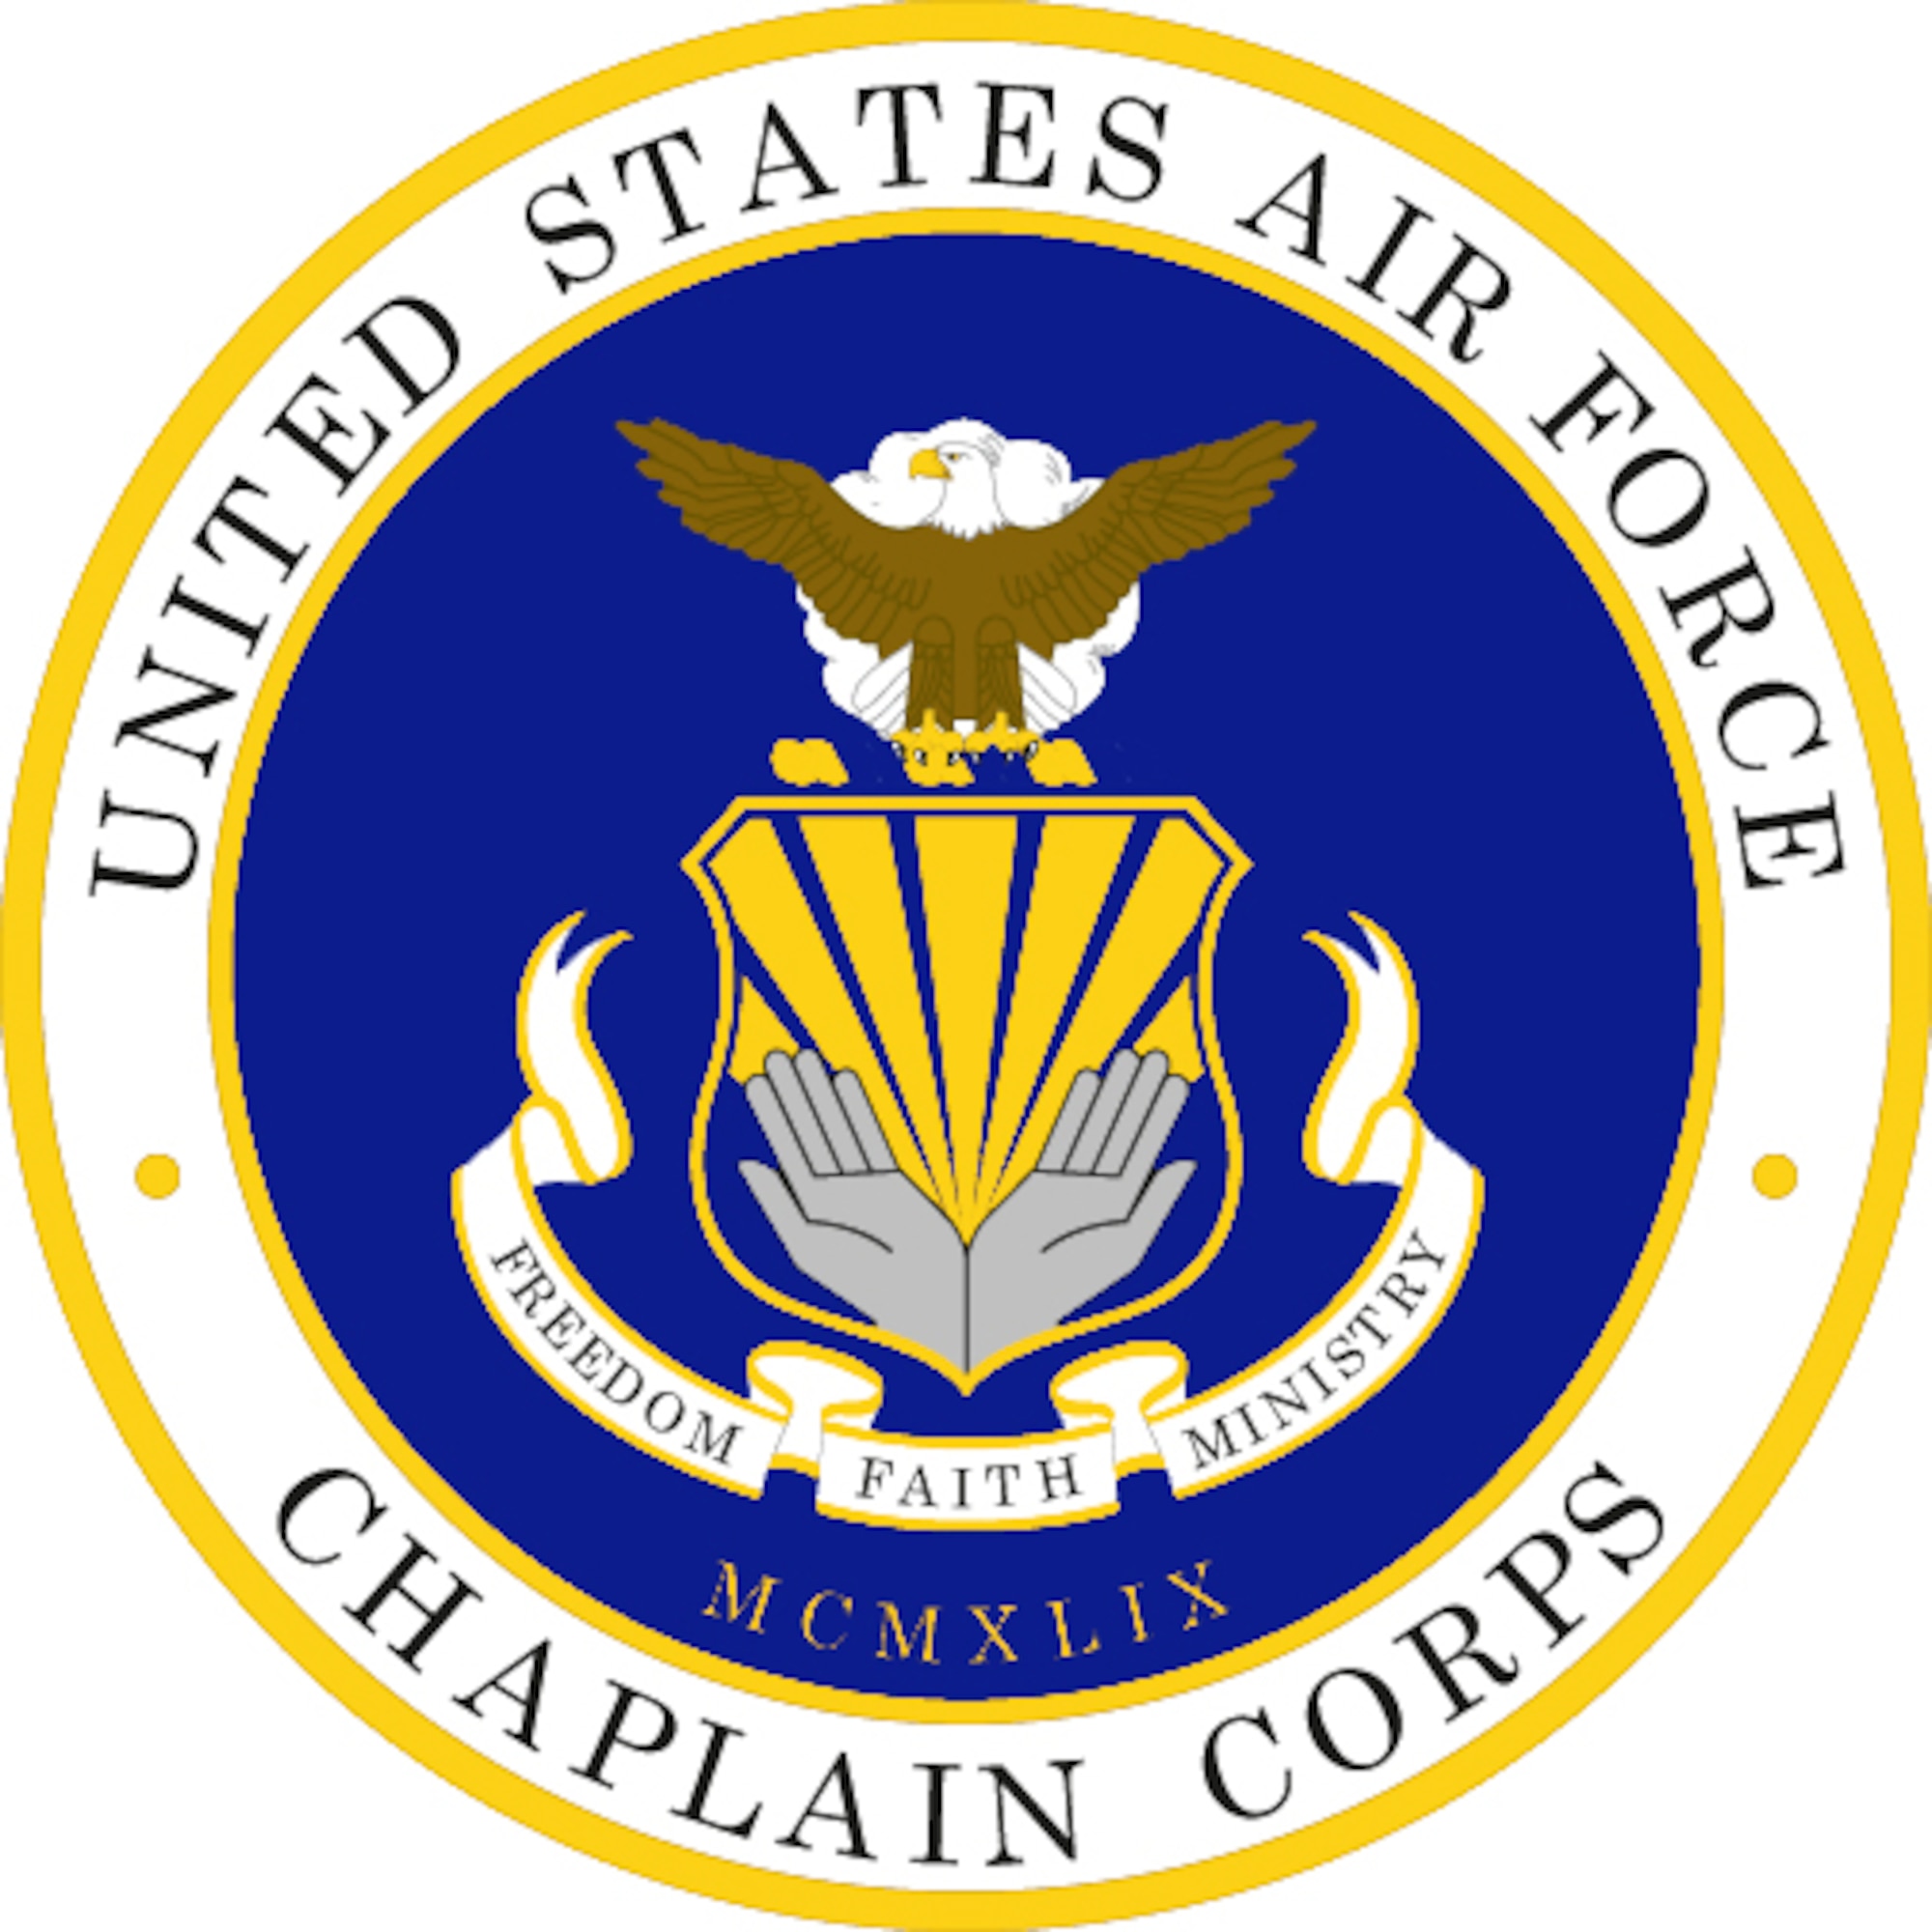 Chaplain Corps (Color). U.S. Air Force graphic. Department of Defense and Military Seals are protected by law from unauthorized use. These seals may NOT be used for non-official purposes. For additional information contact the appropriate proponent.